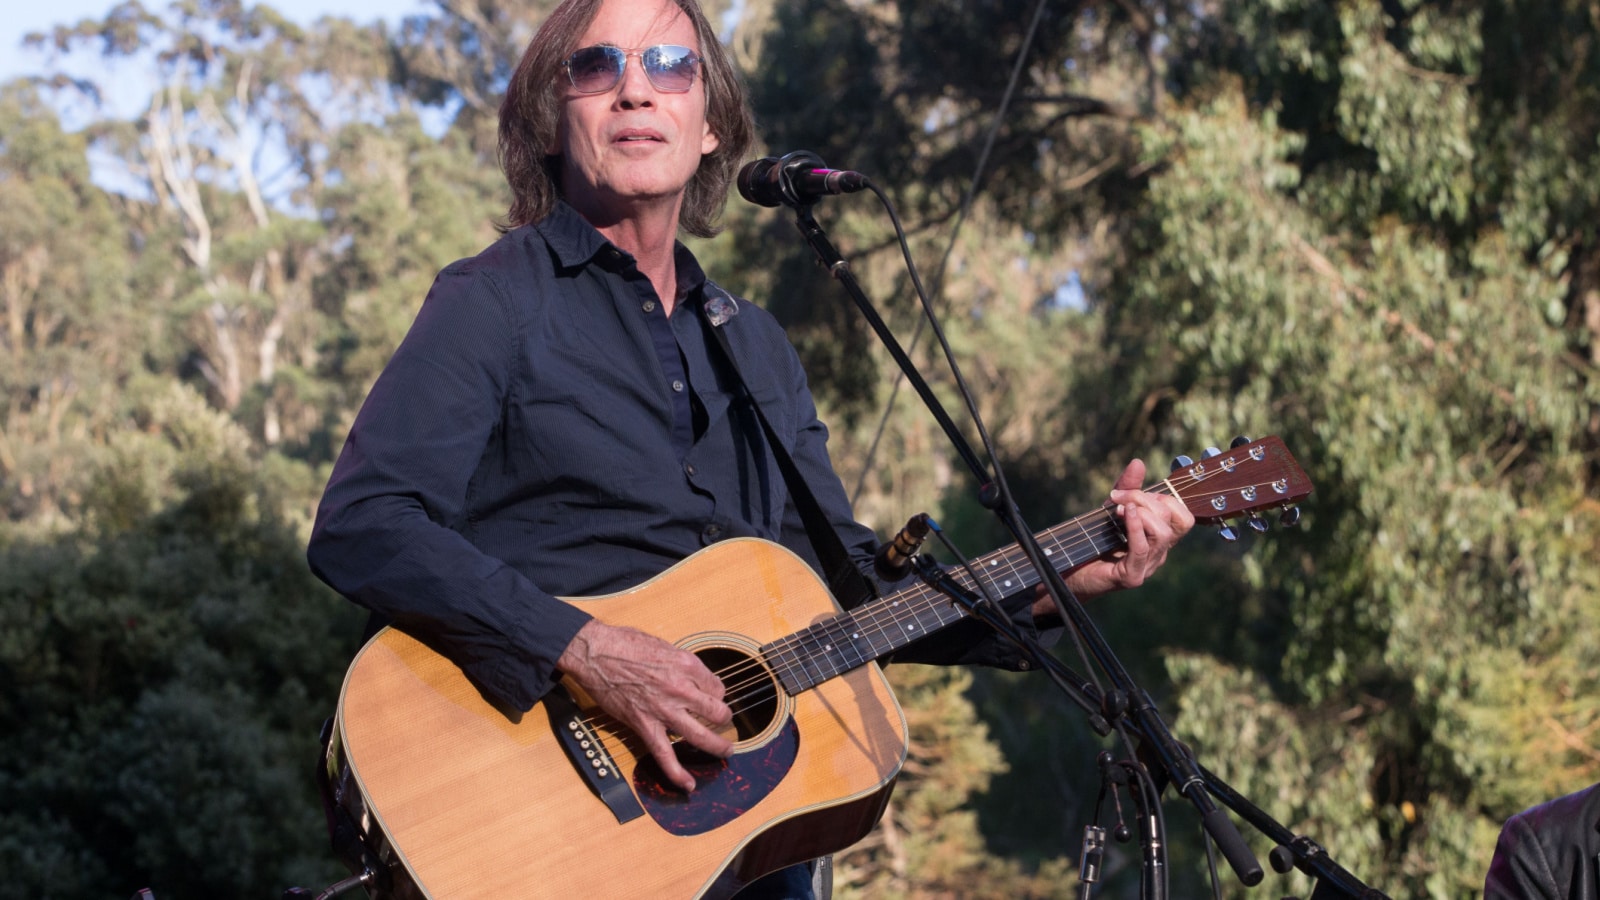 <p>A great addition to any playlist, “Running on Empty” by Jackson Browne captures the essence of the road trip experience. The song features a catchy, upbeat melody that is easy to sing along to. Plus, it conveys a sense of freedom, adventure, and the exhilaration of being on the open road.</p>